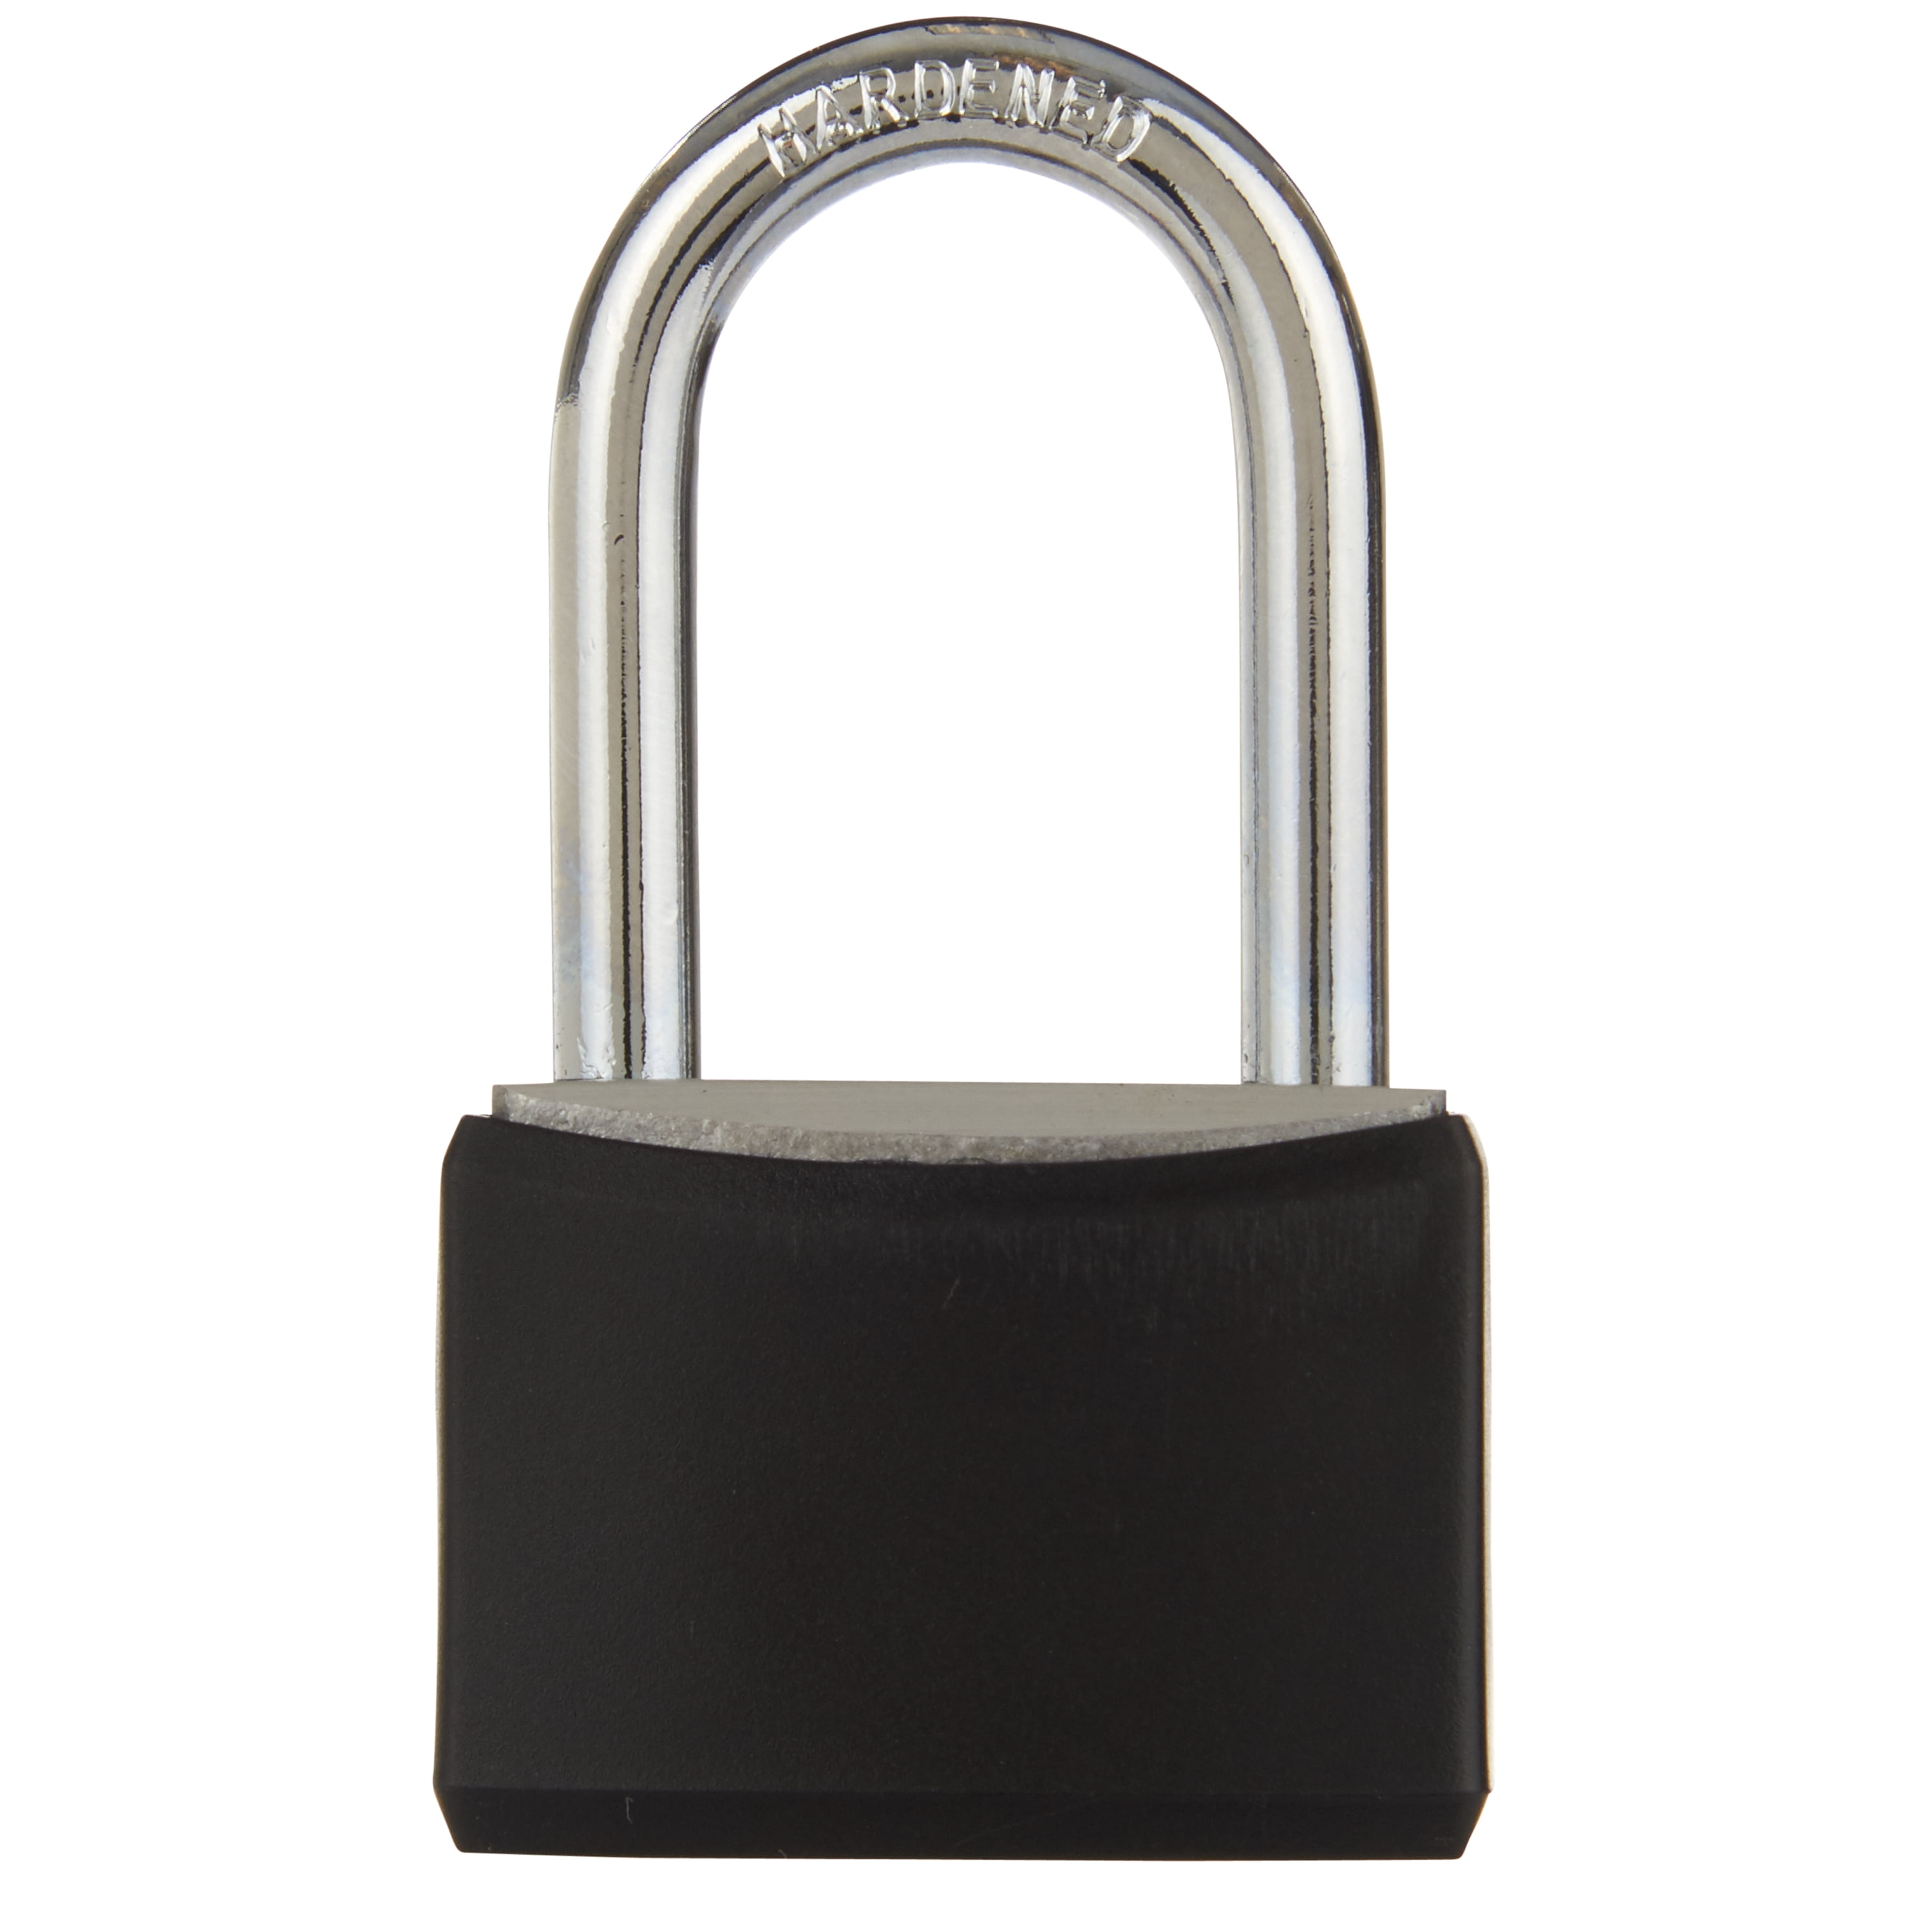 Hyper Tough Covered Aluminum Padlock, 40mm Body with 1-8/16 inch Long Shackle